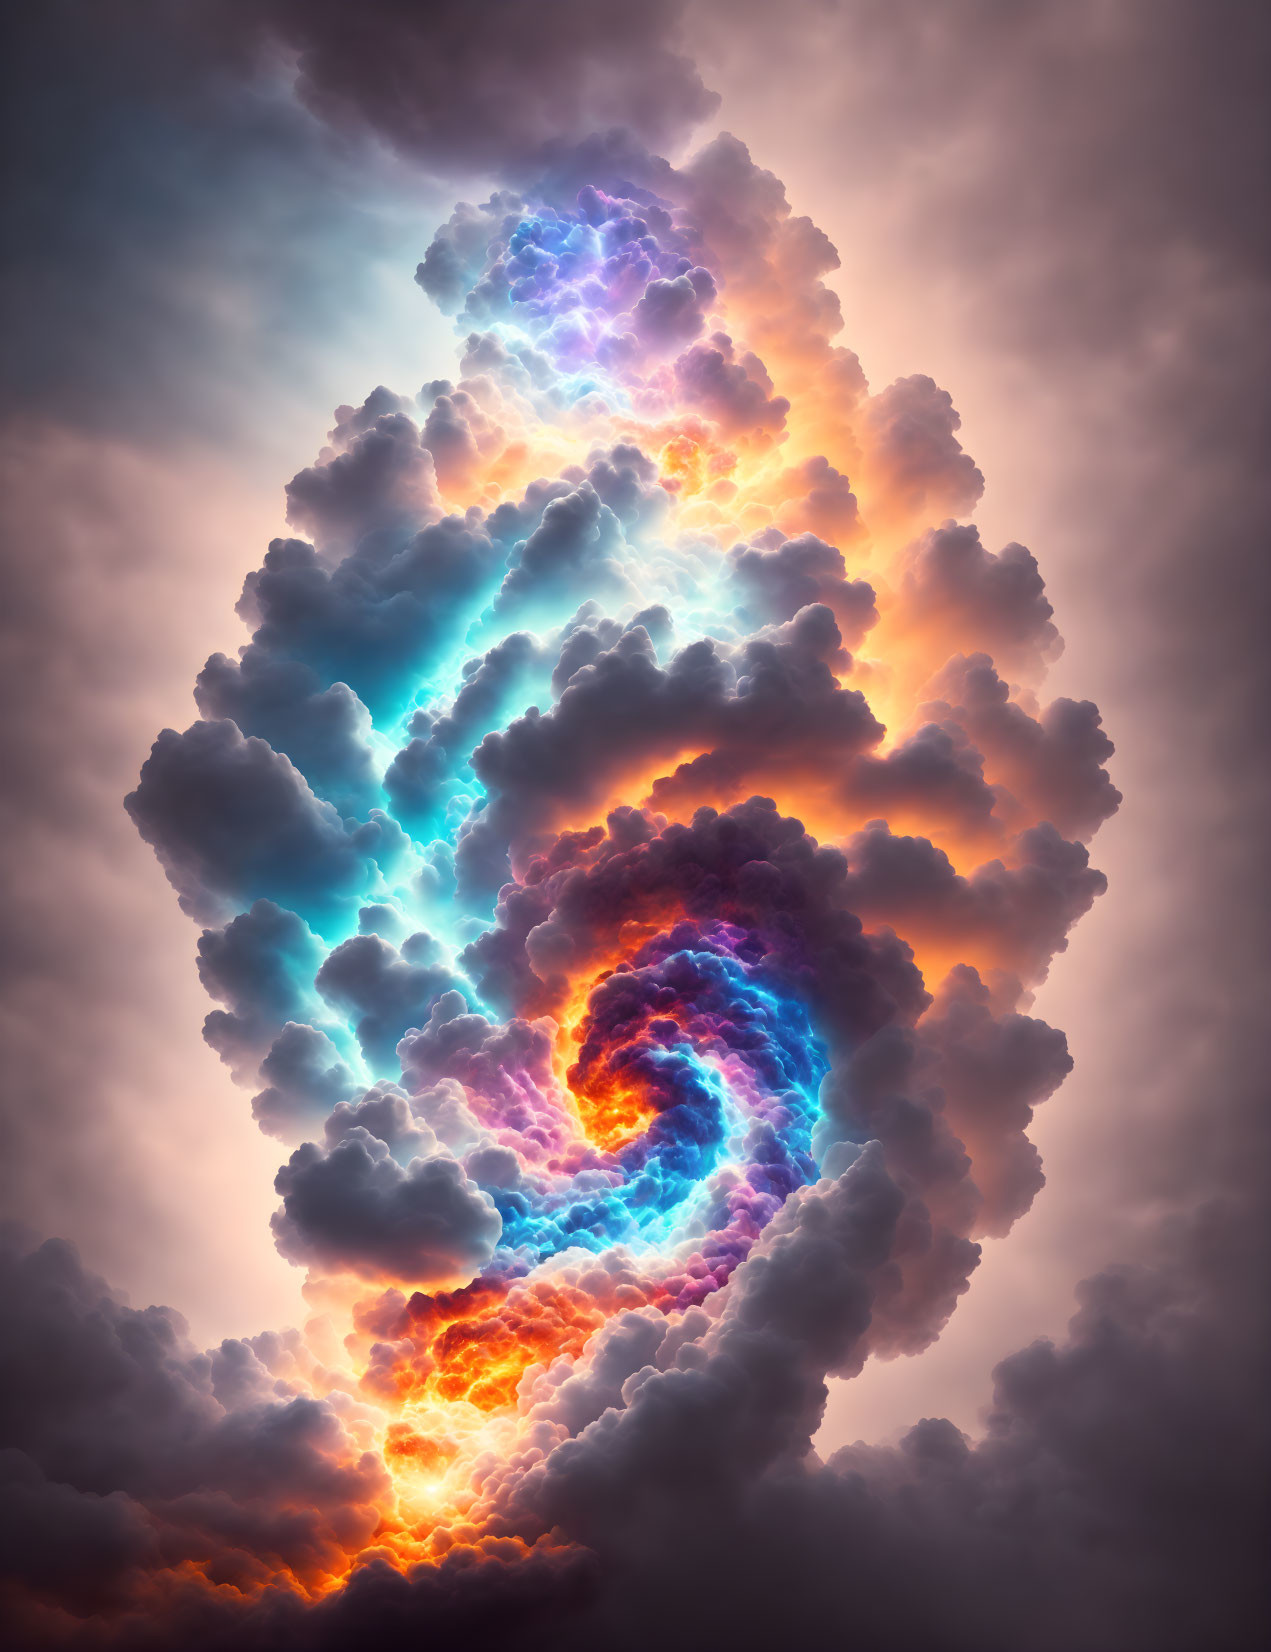 Colorful Swirling Cloud Formation Resembling Fiery Galaxy